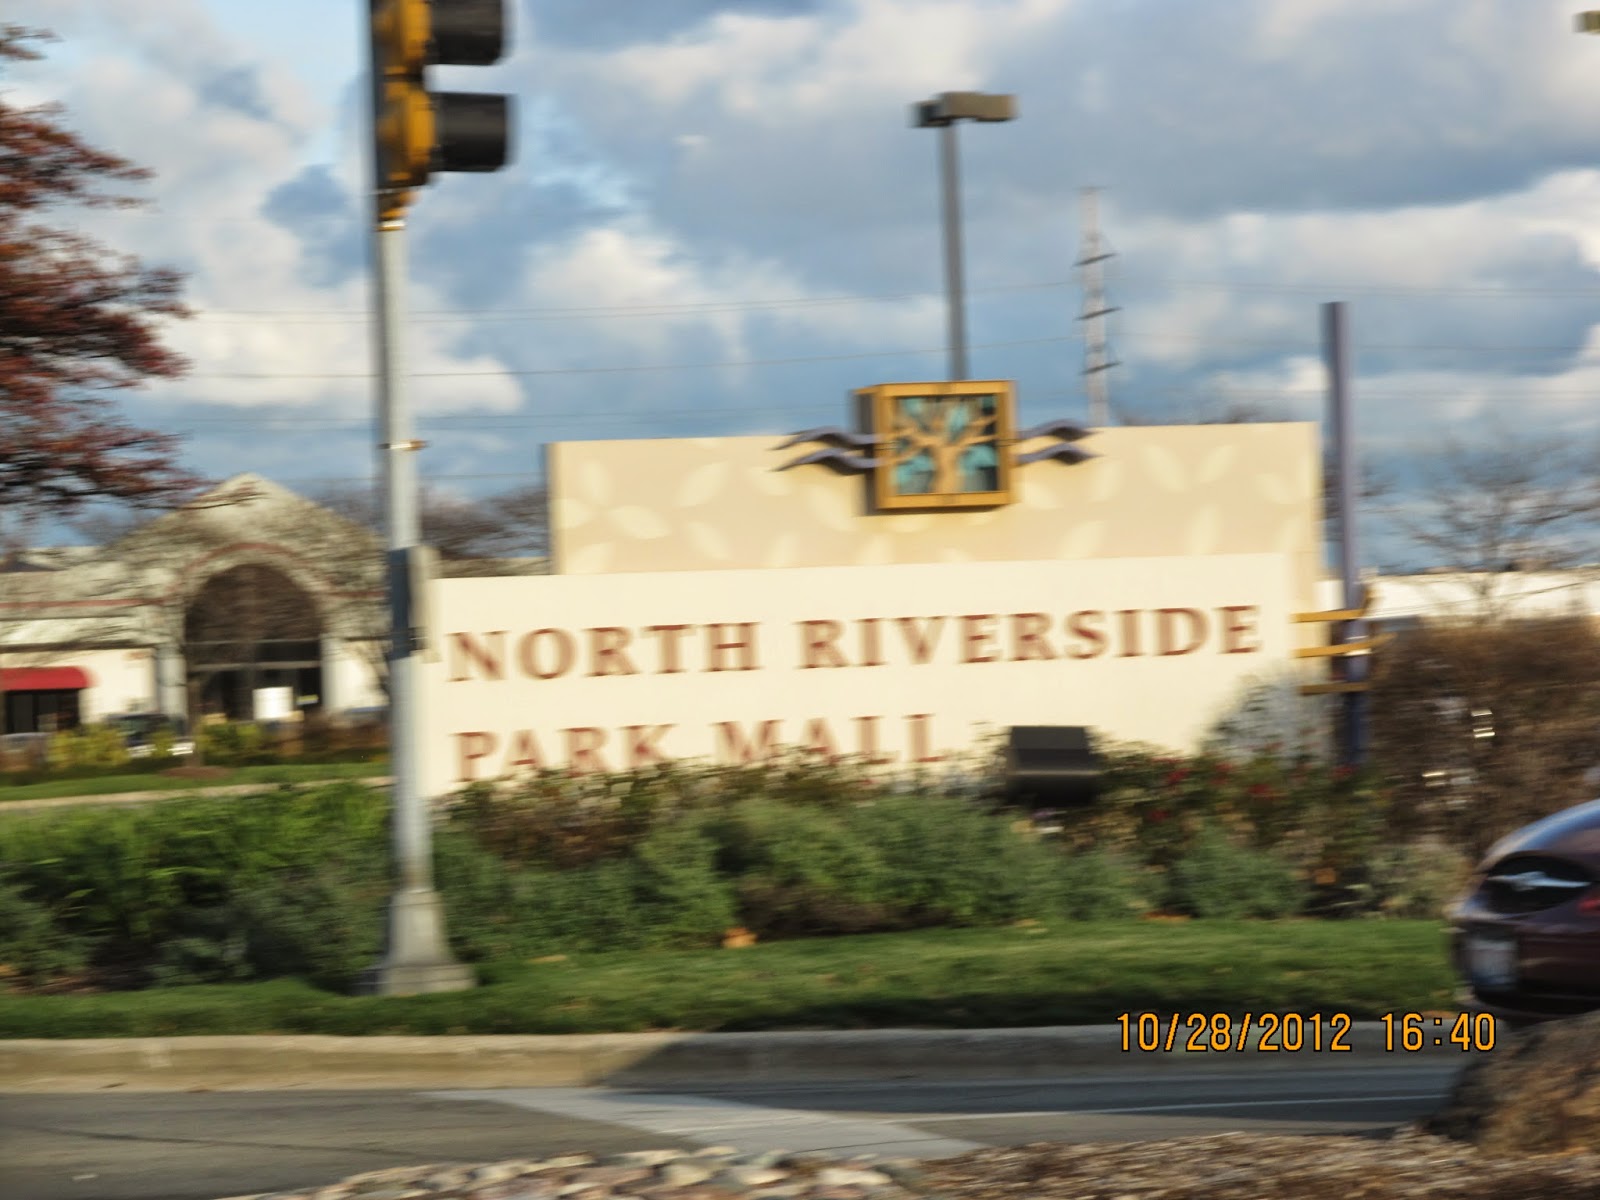 Y'all remember malls? #fyp #mall #benches #kiosks #northriverside #ill